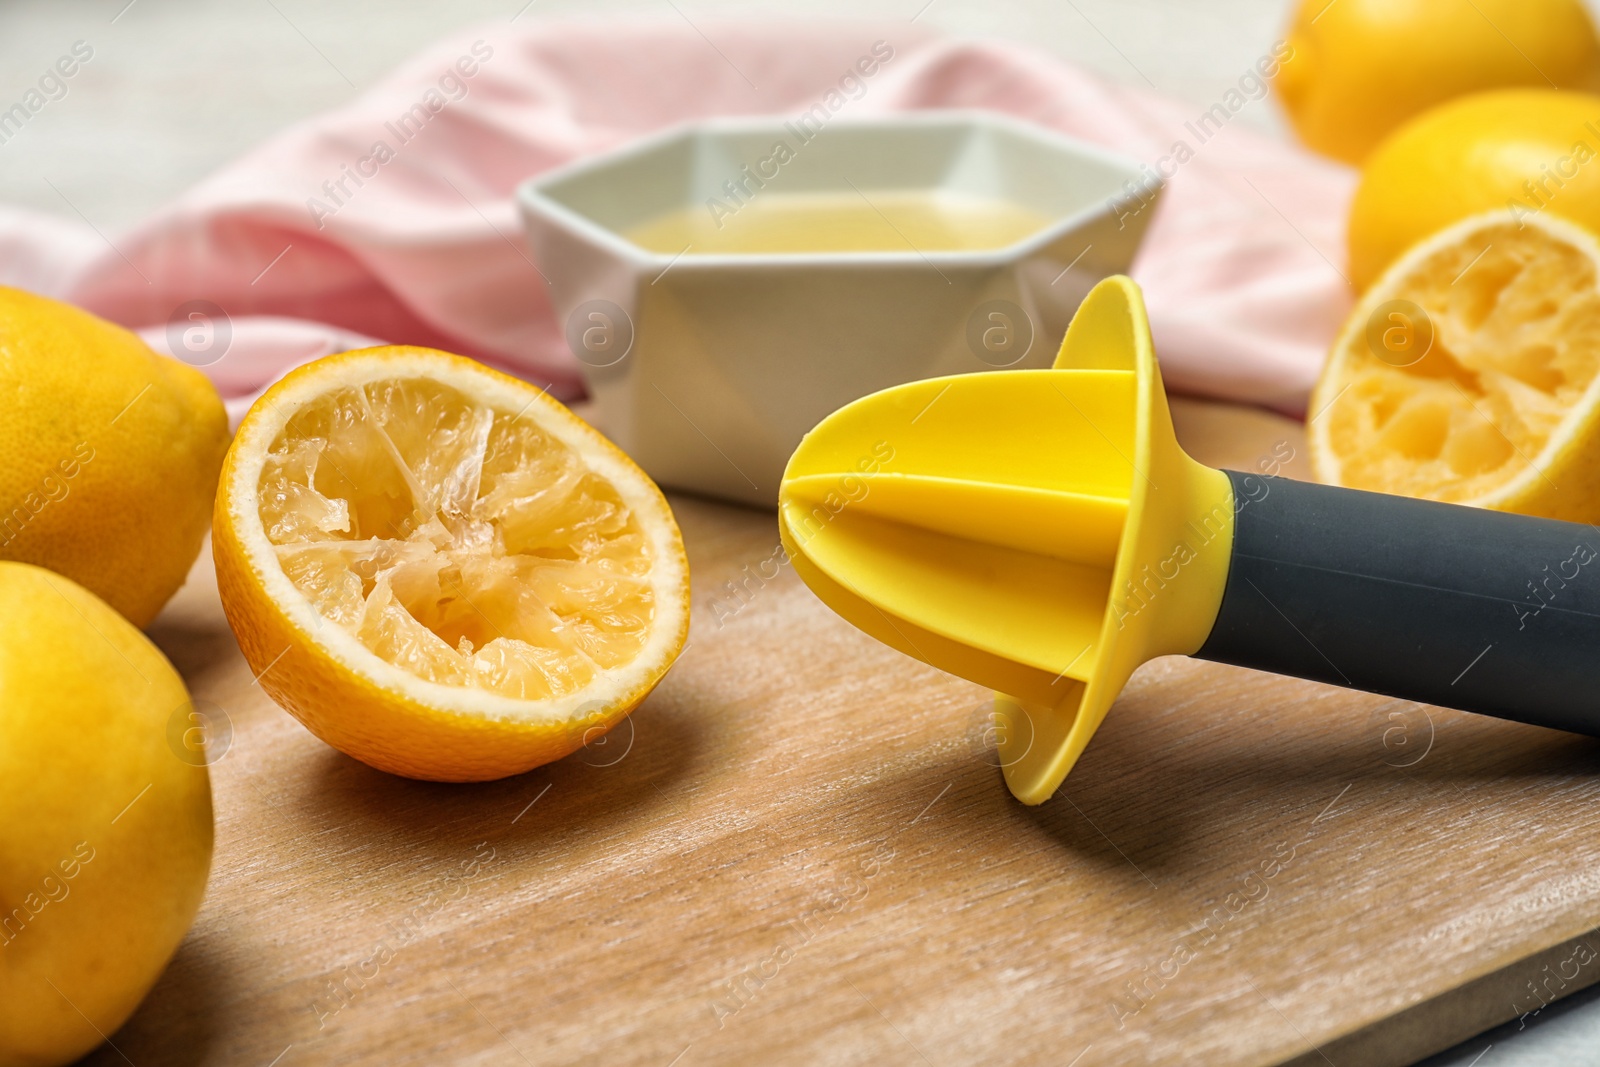 Photo of Wooden board with plastic juicer and squeezed lemon half on board